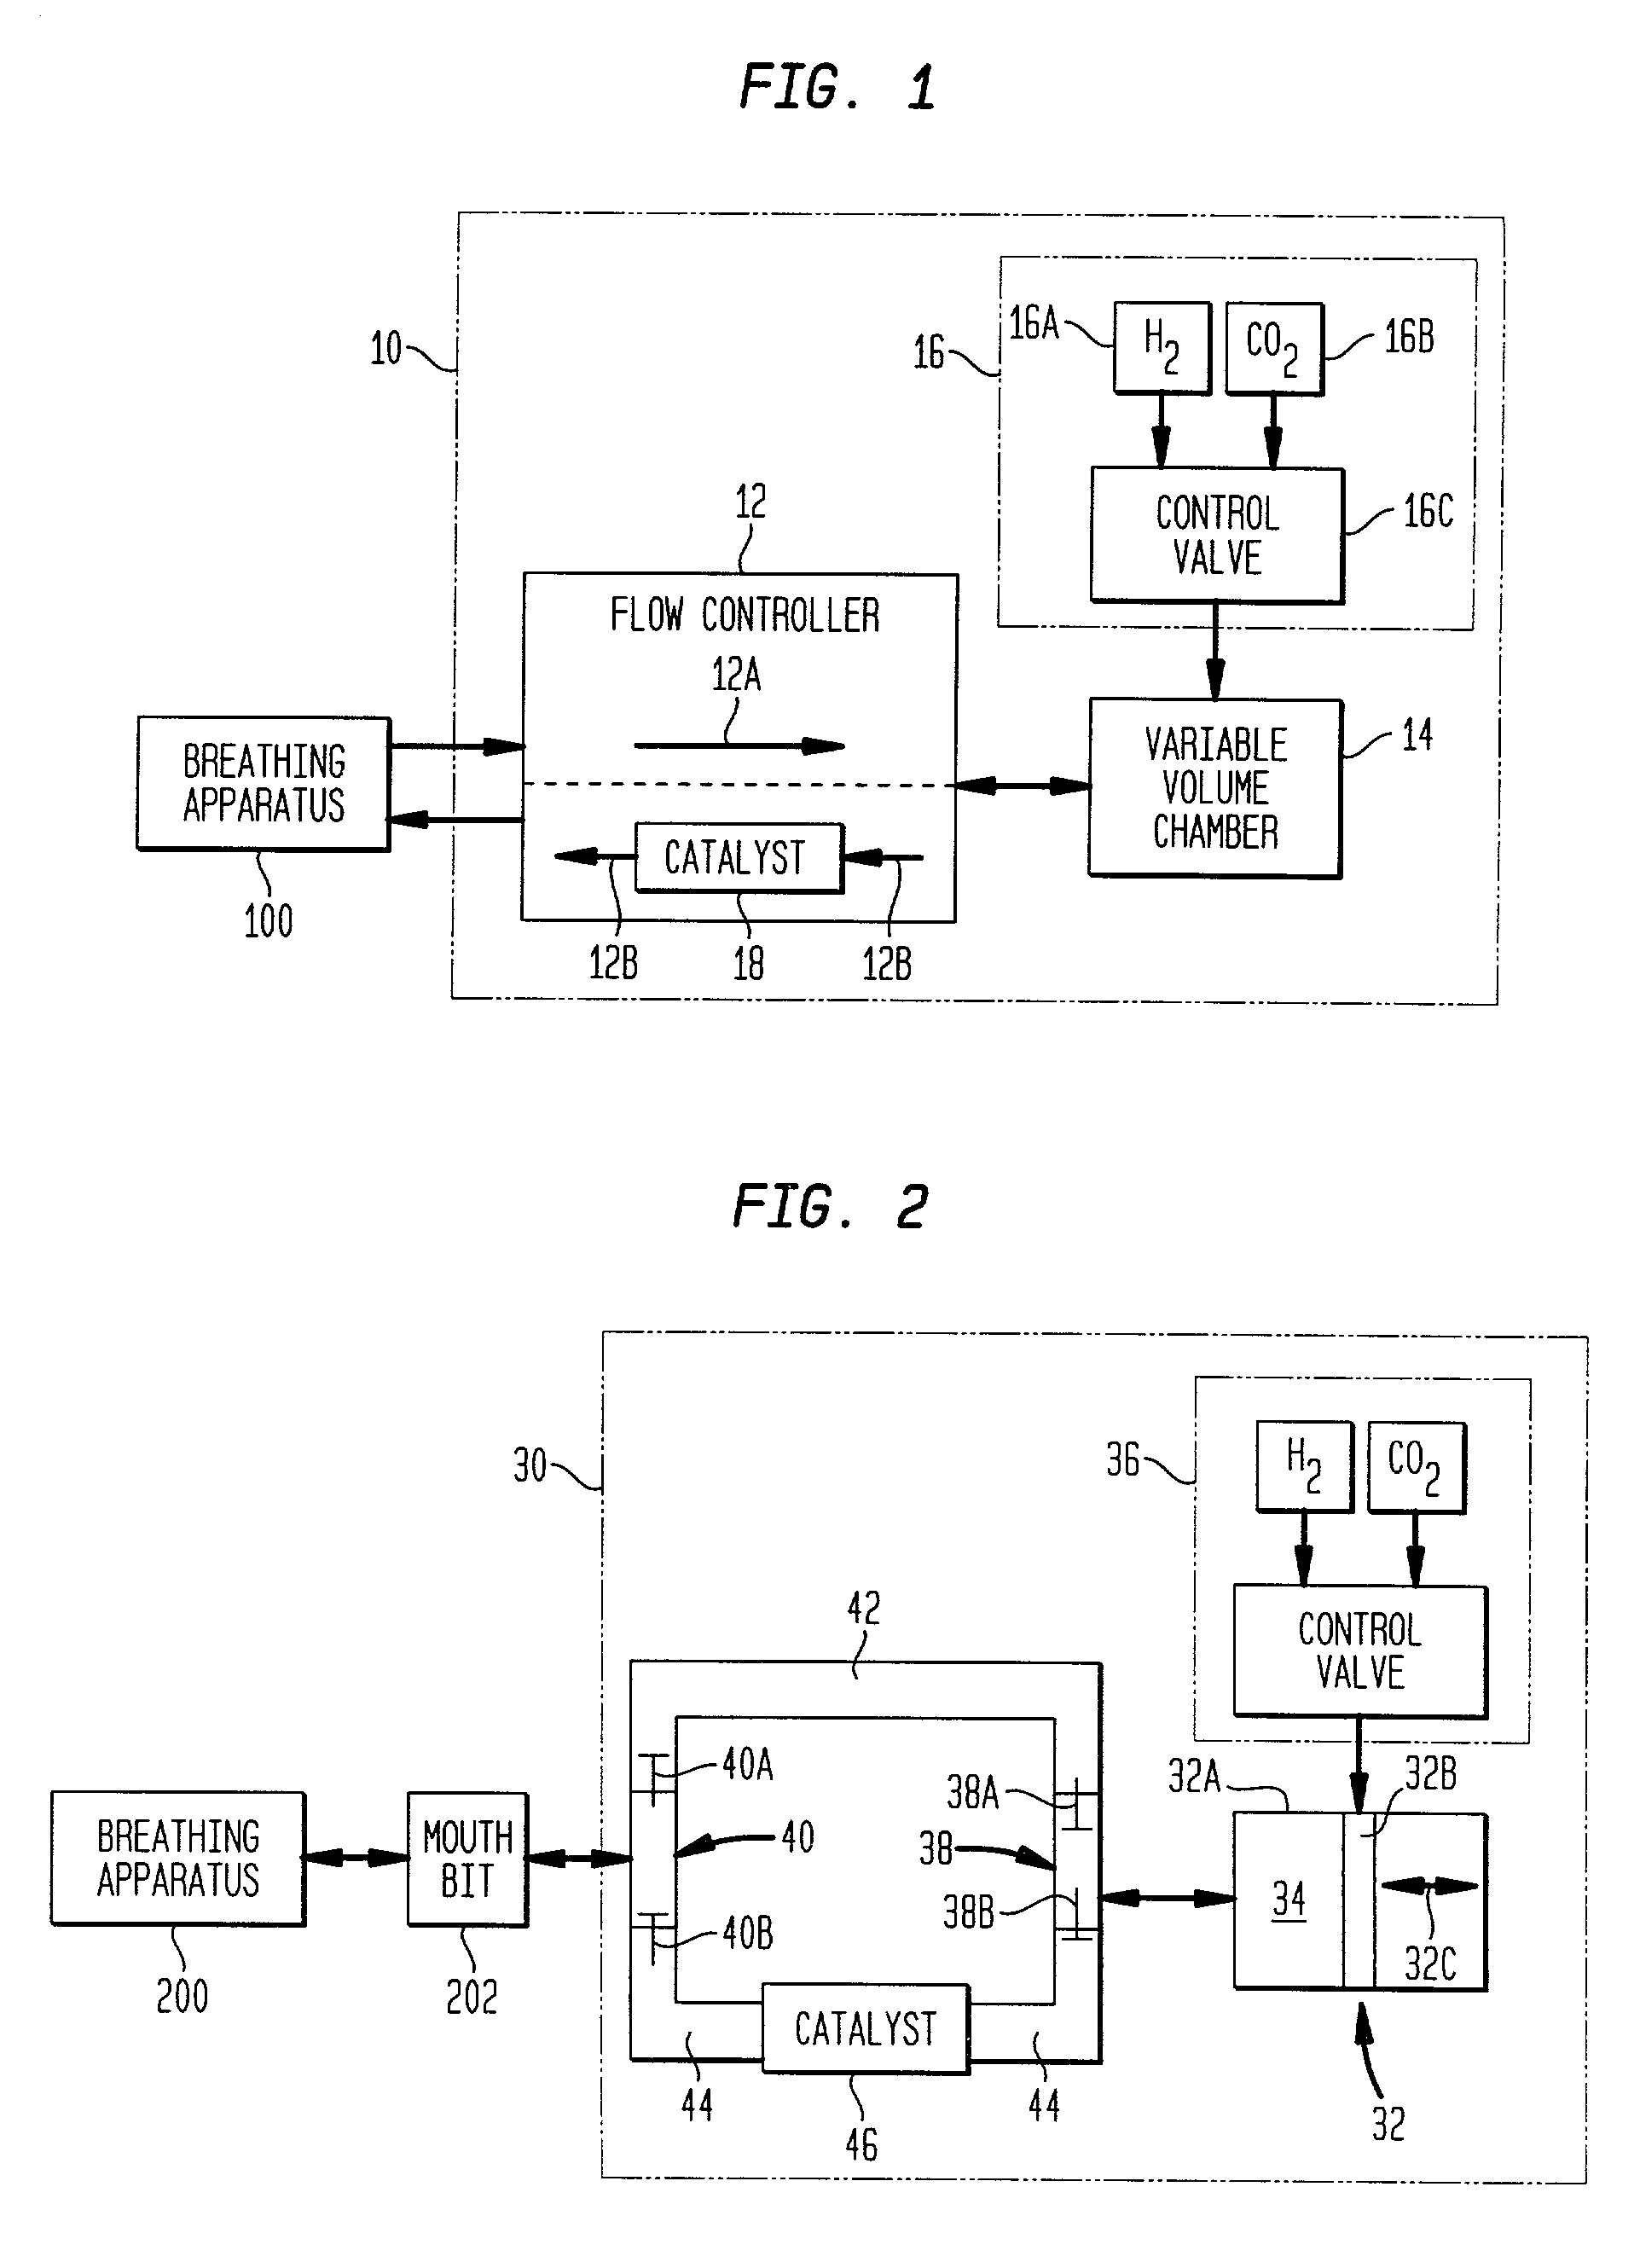 System for simulating metabolic consumption of oxygen